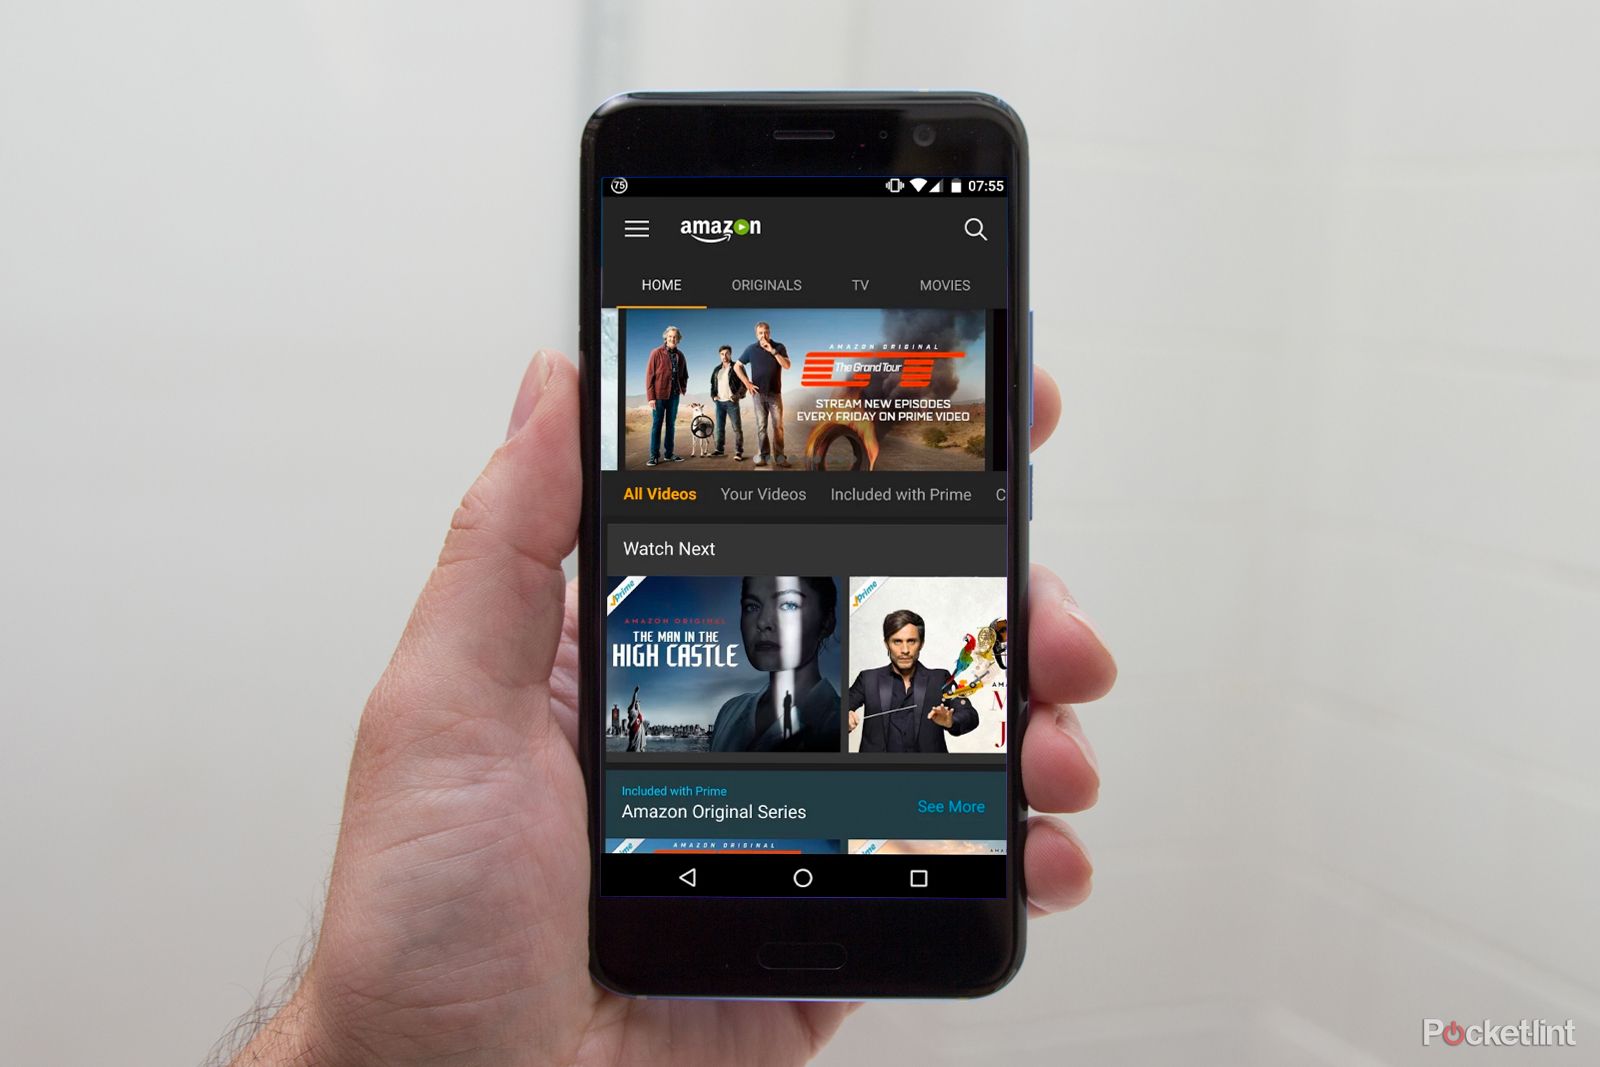 Amazon might soon offer a free ad-supported version of Prime Video image 1